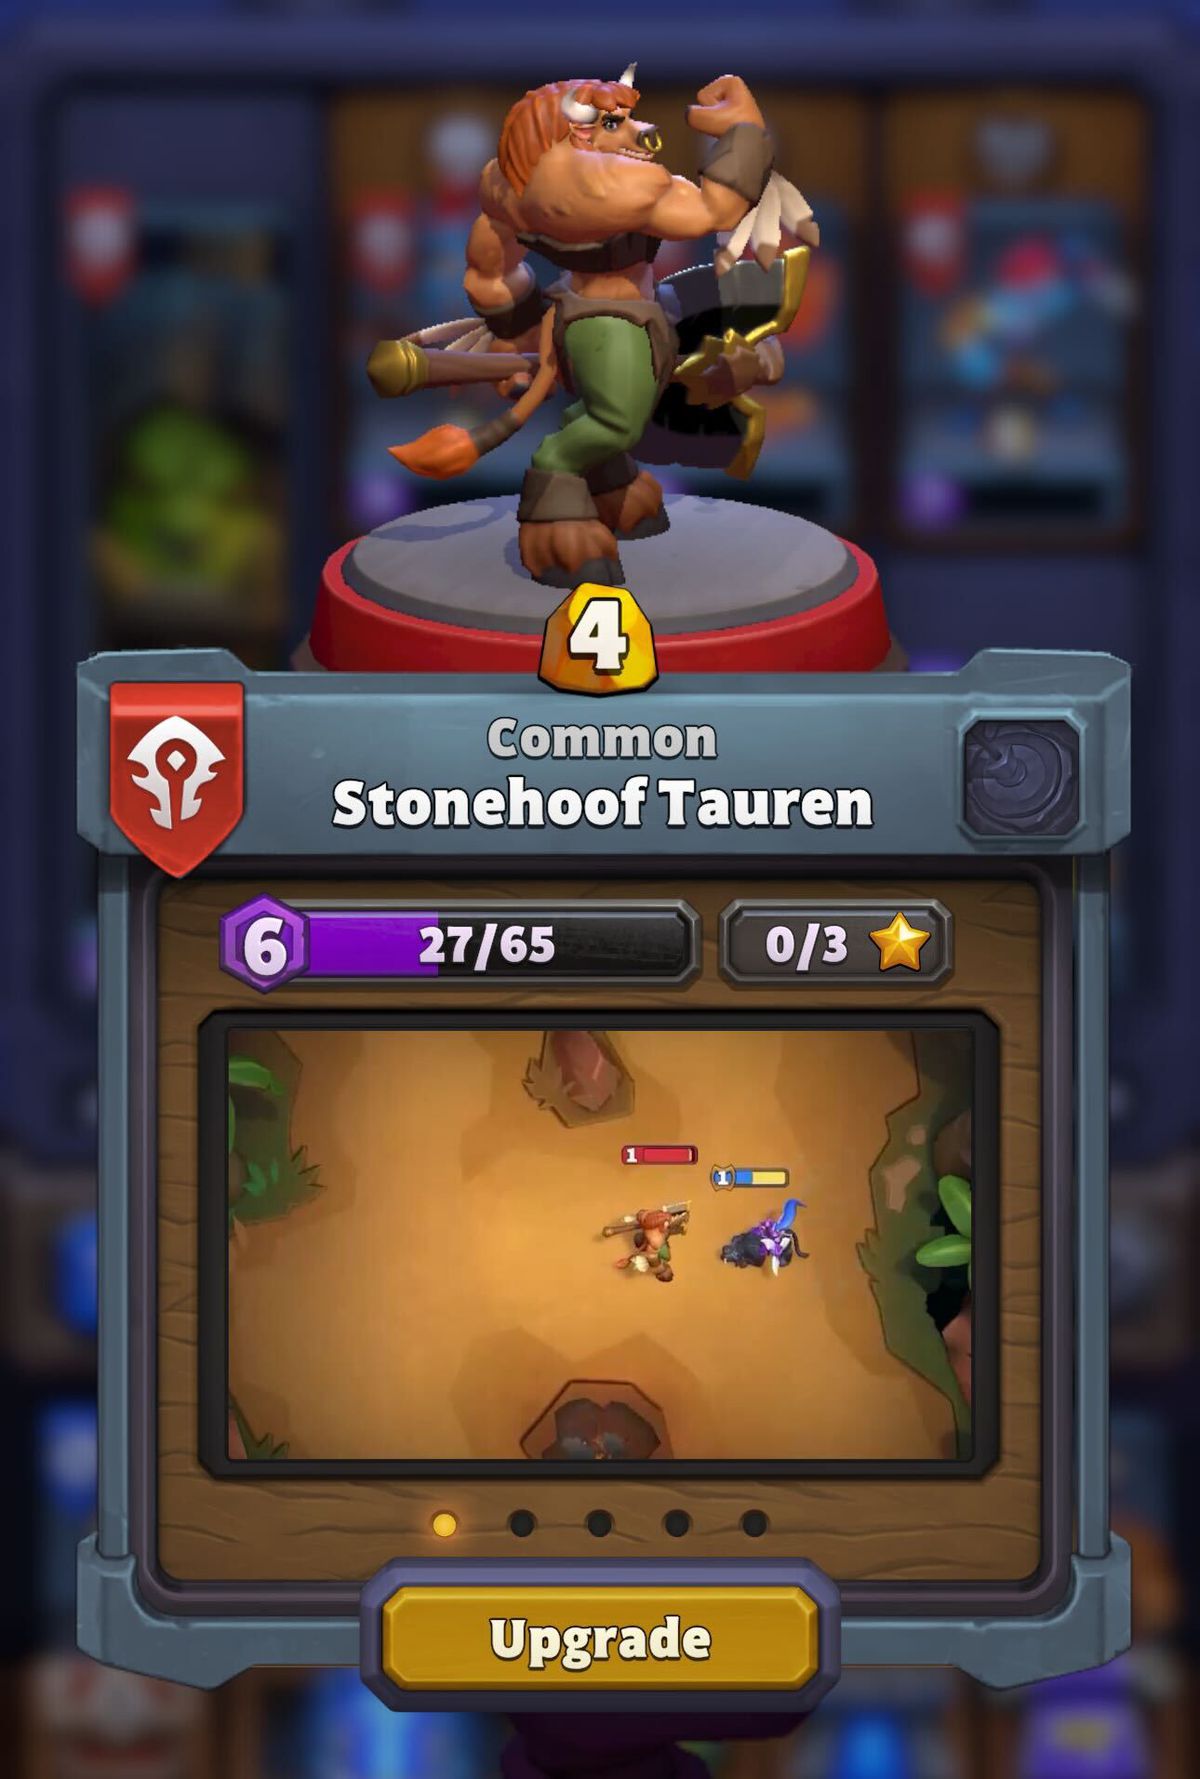 A unit image showing a Stonehoof Tauren in Warcraft Rumble